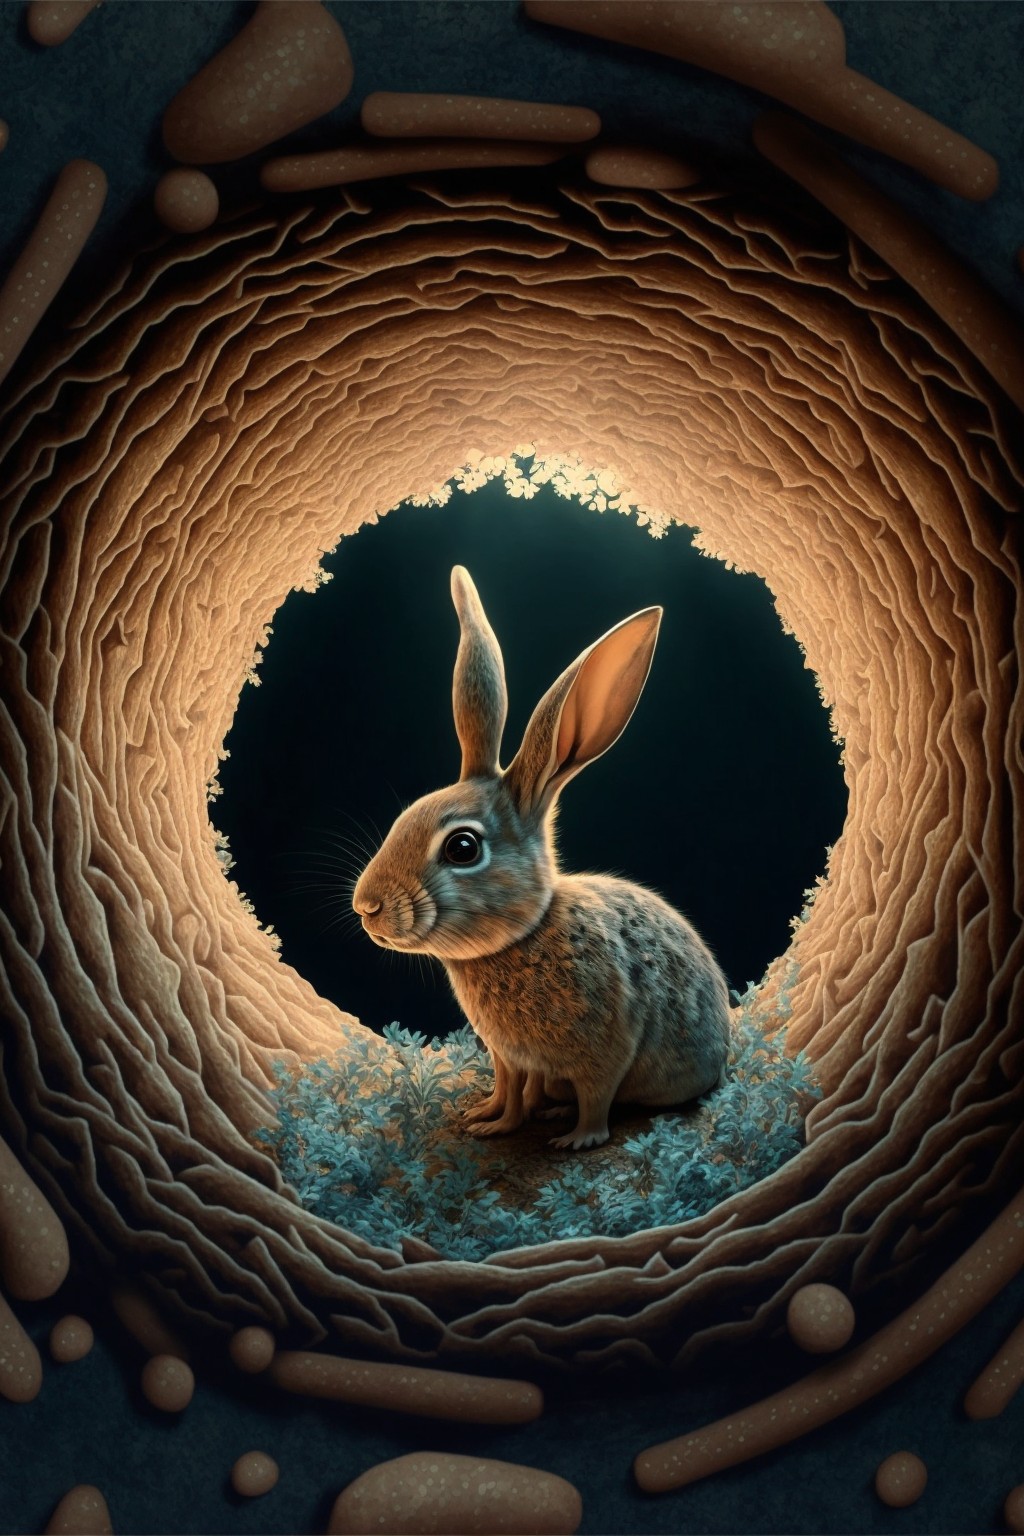 The rabbit who finally found the exit in the psychedelic cave